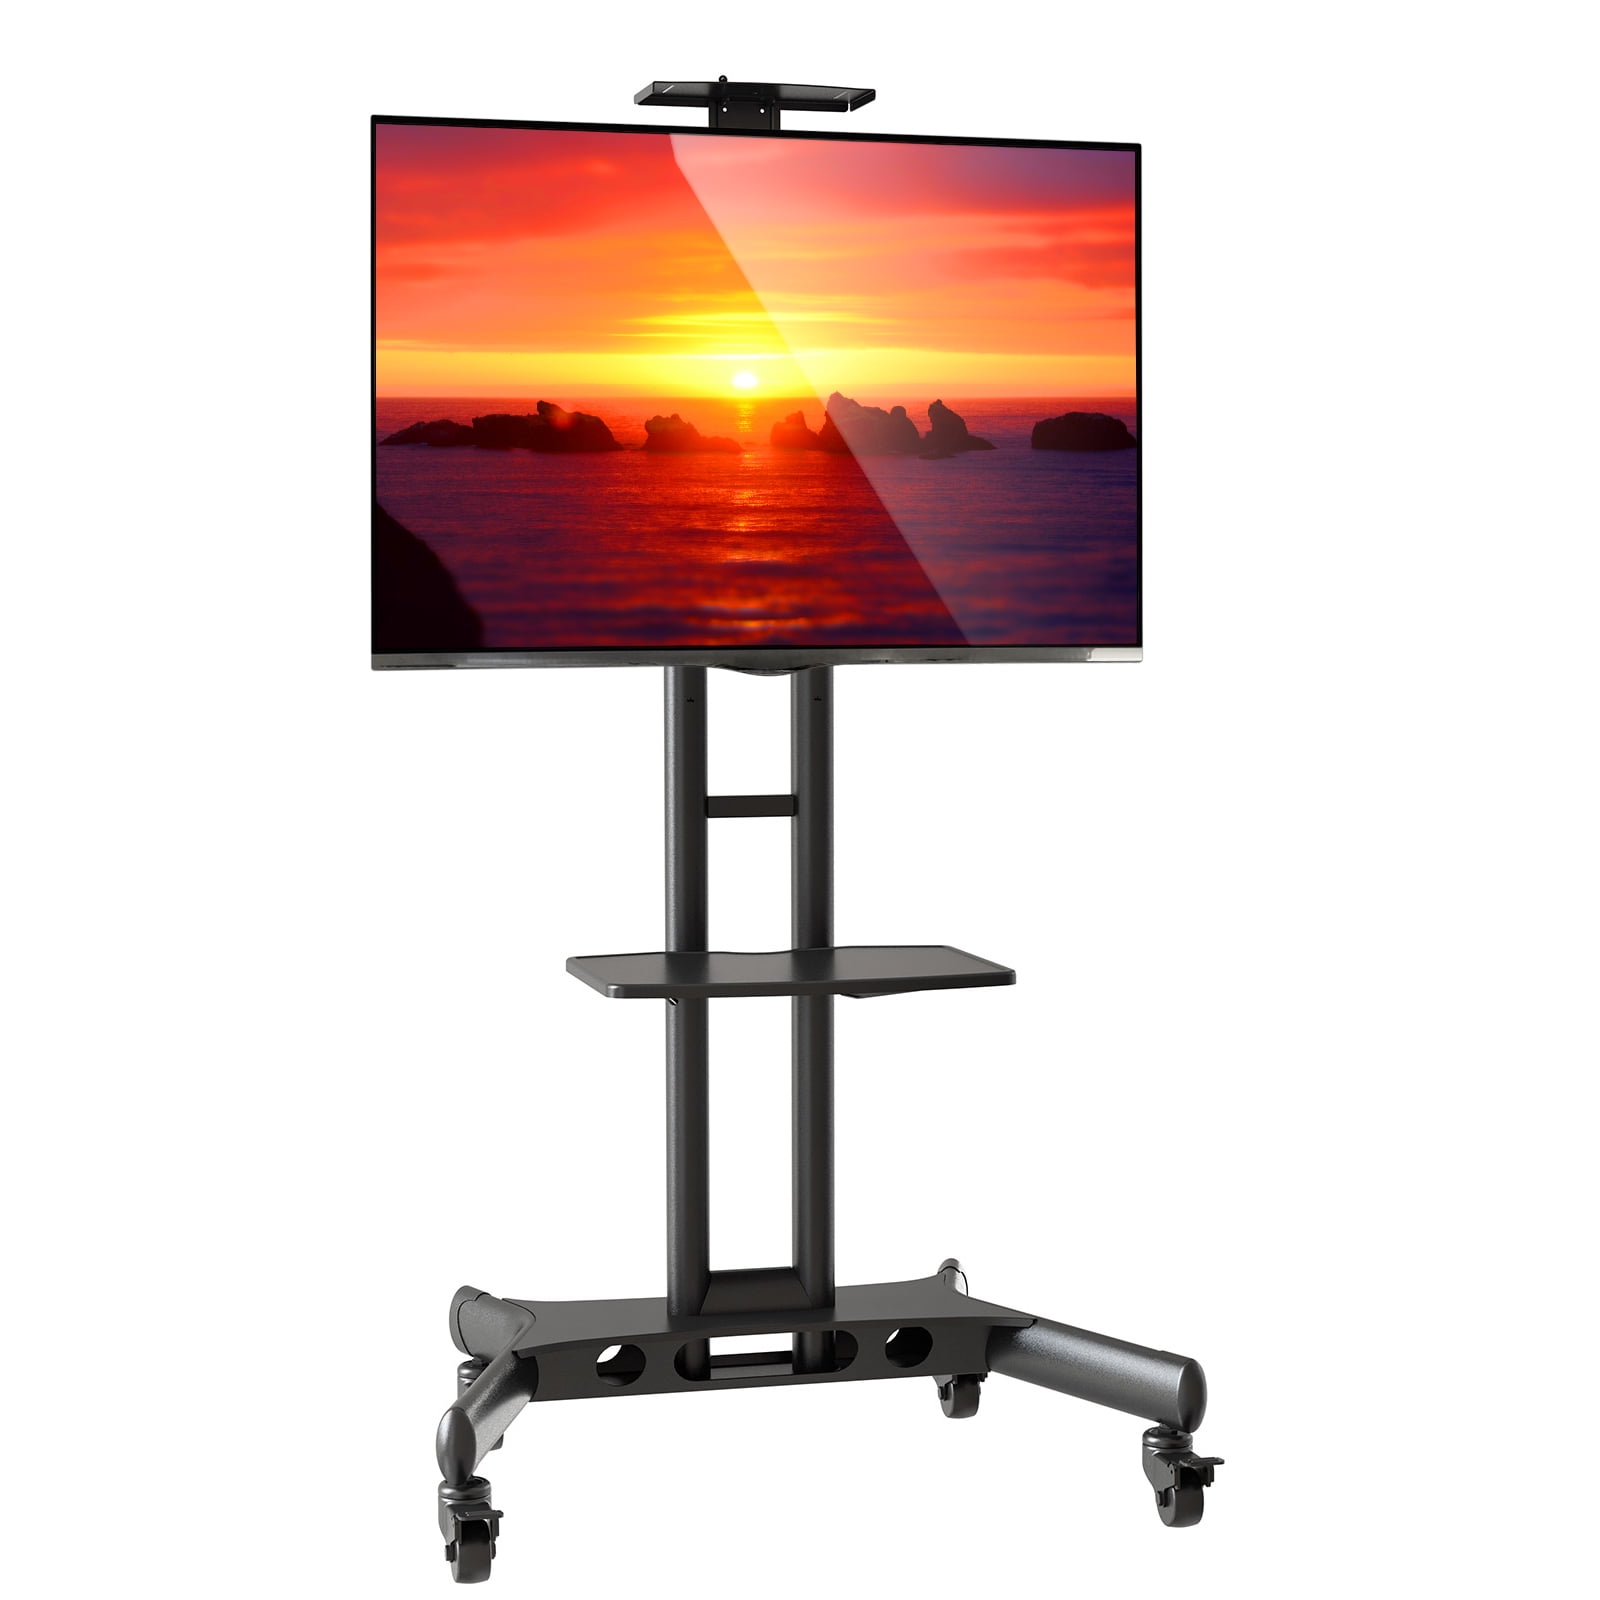 Mount Factory Rolling TV Stand Mobile TV Cart for 32-65 inch 